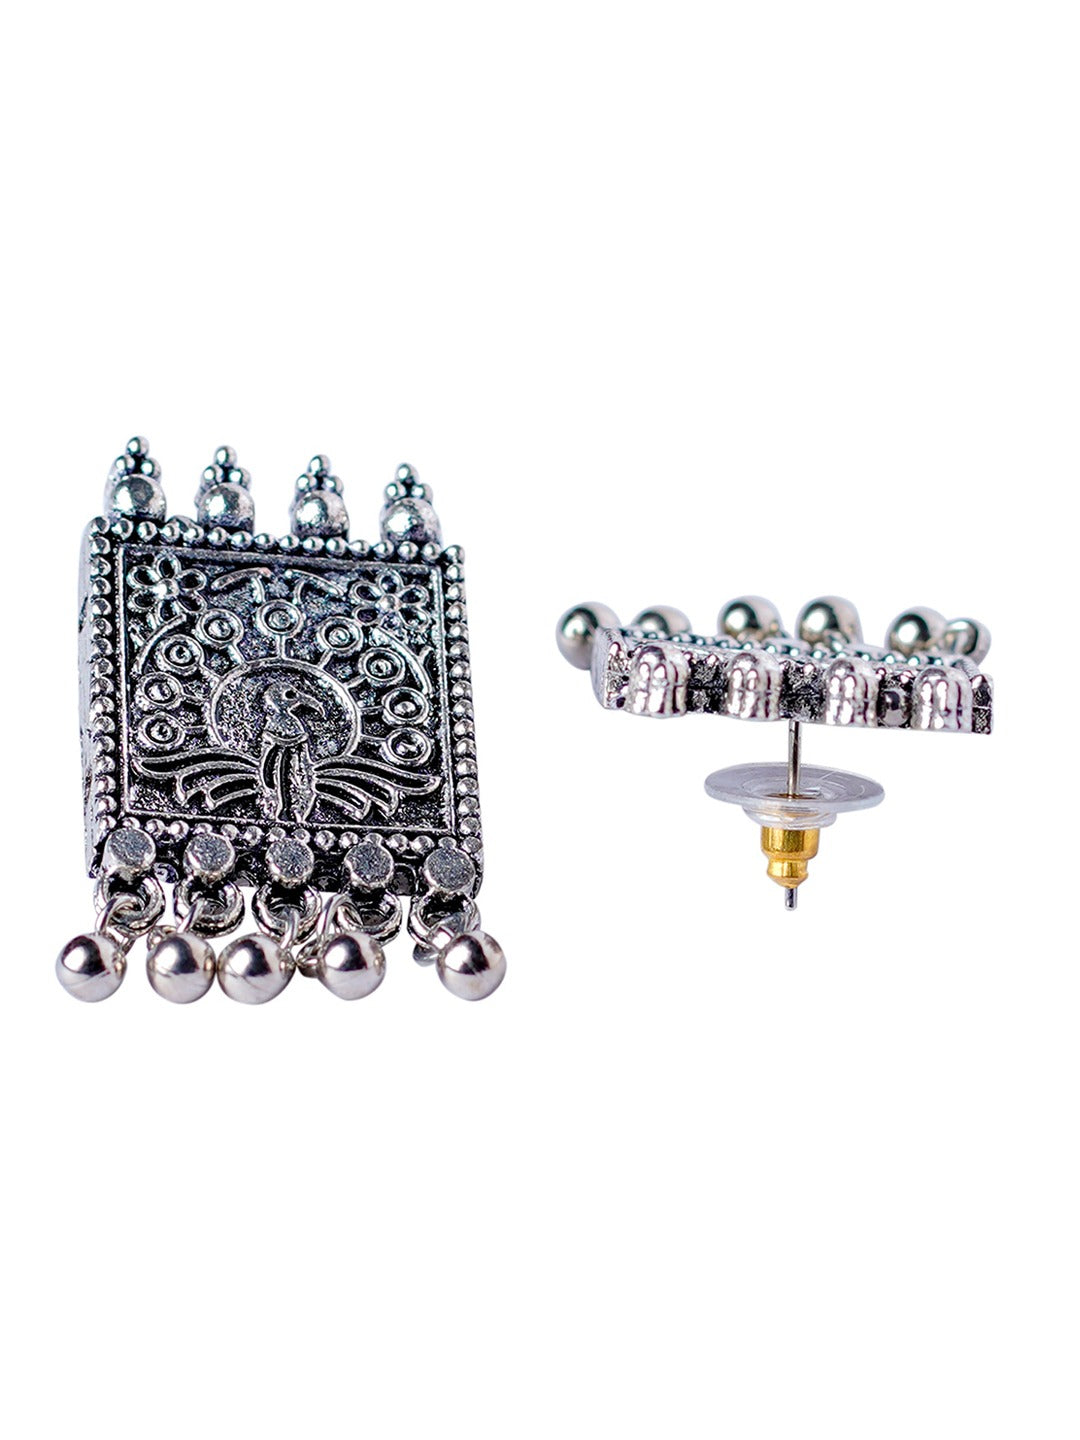 Women's Oxidised Silver-Pated Blue Stone-Studded Jewellery Set - Morkanth